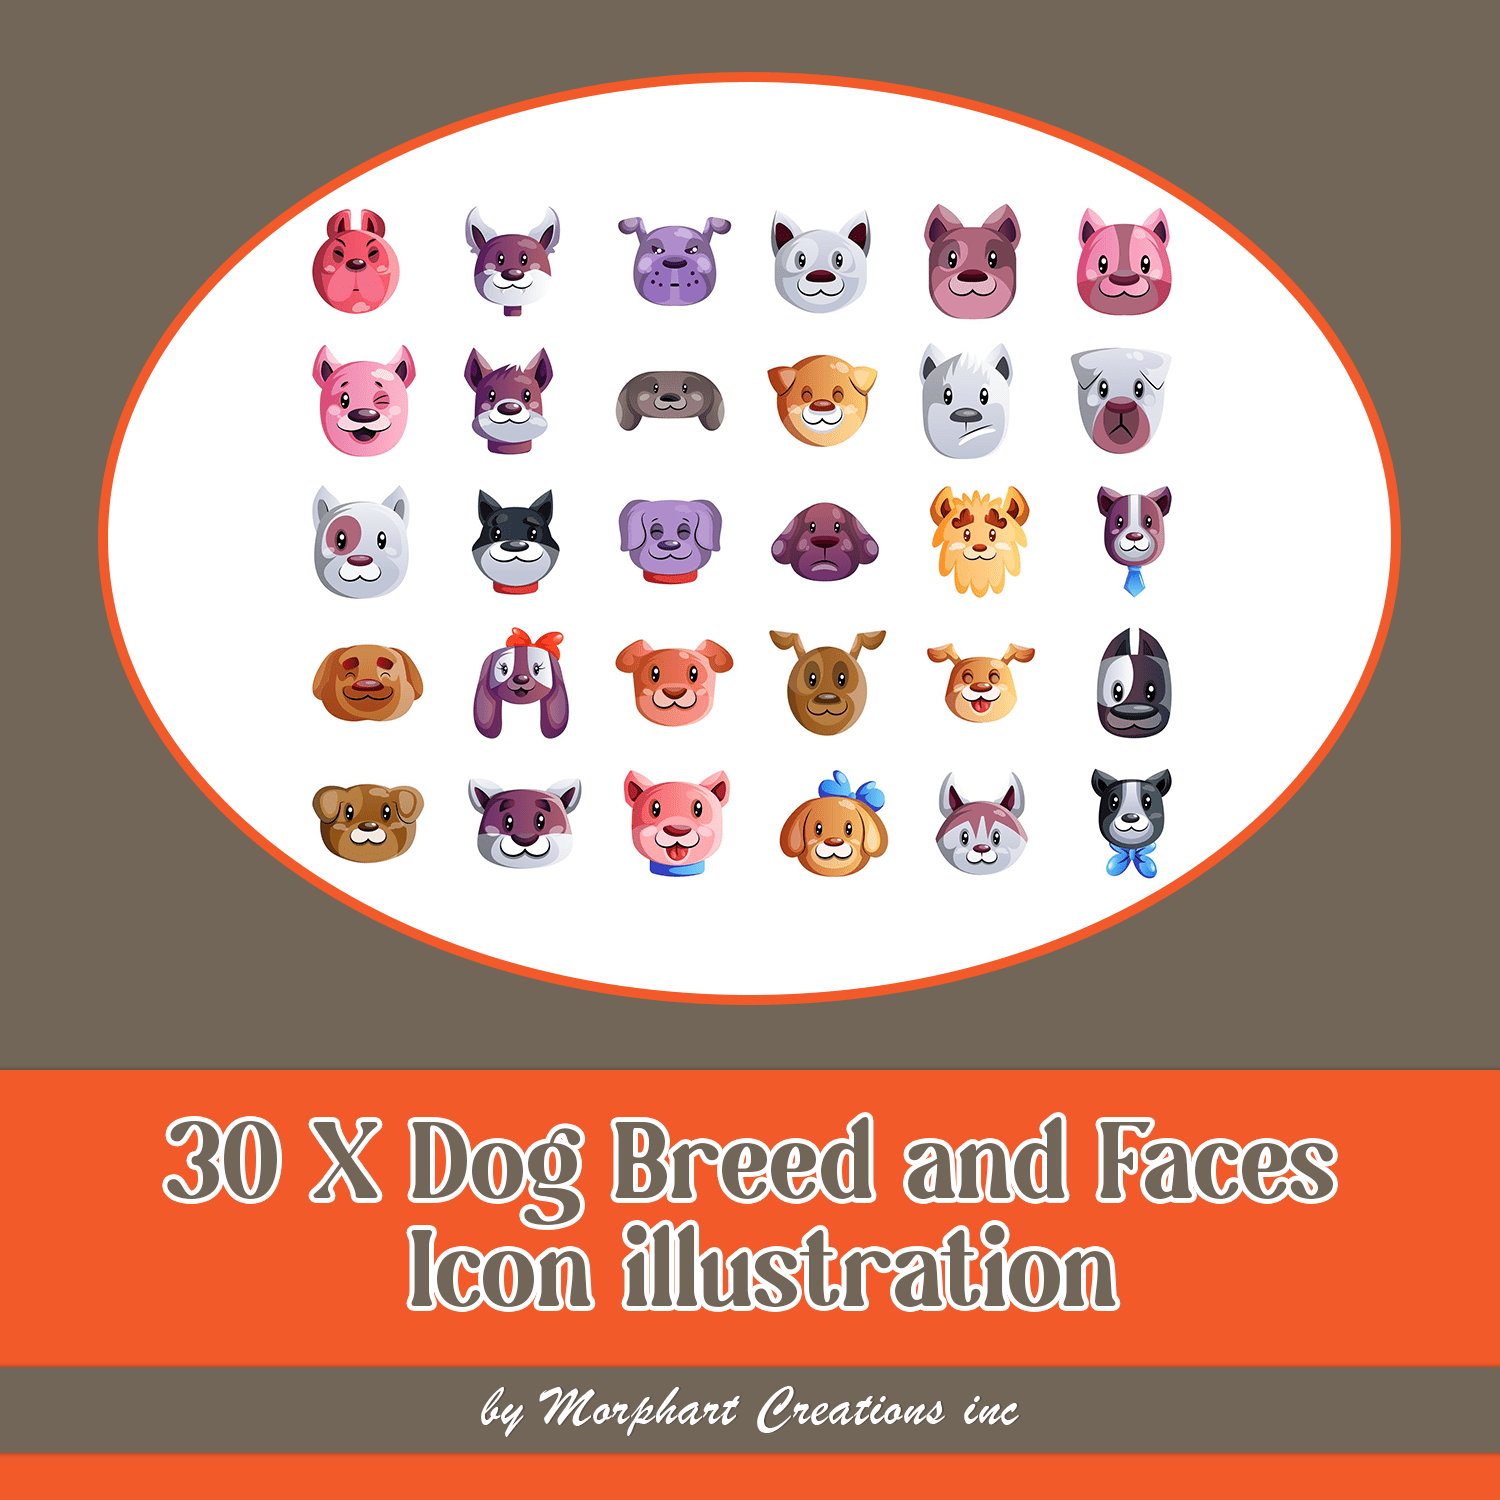 Preview dog breed and faces icon illustration.